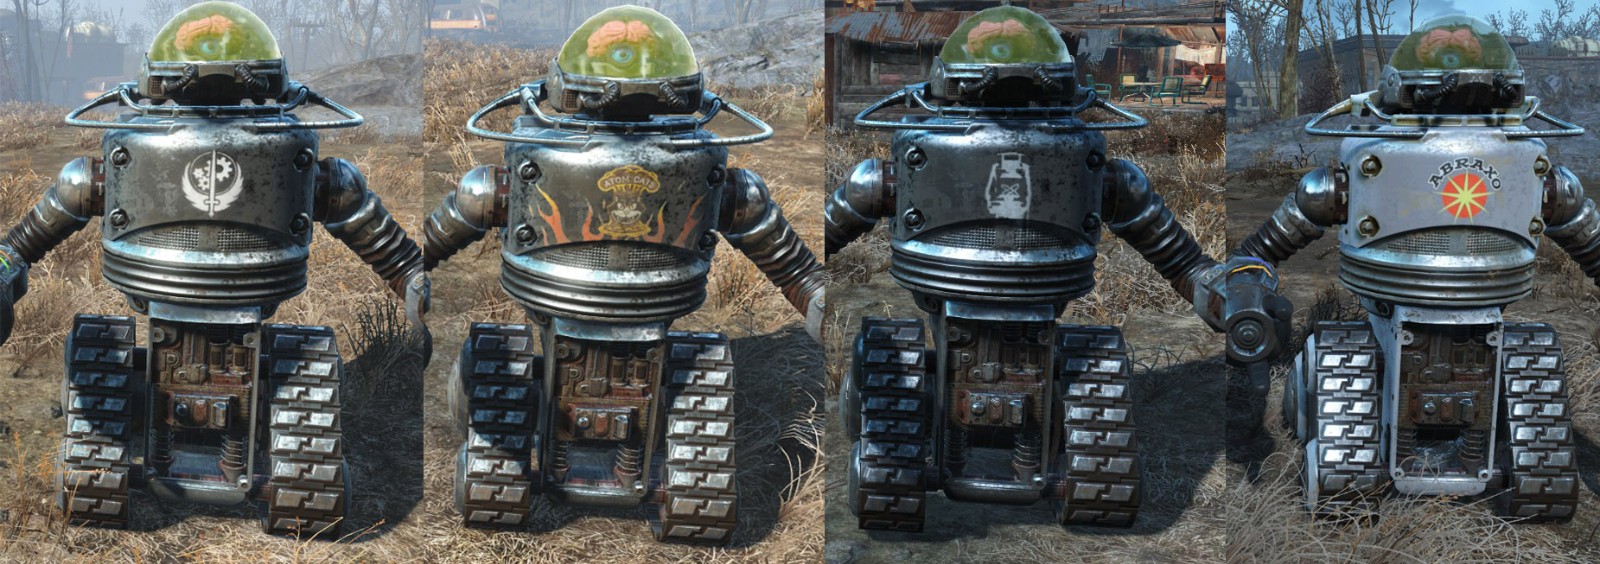 fully upgraded automatrons appearing as unarmed